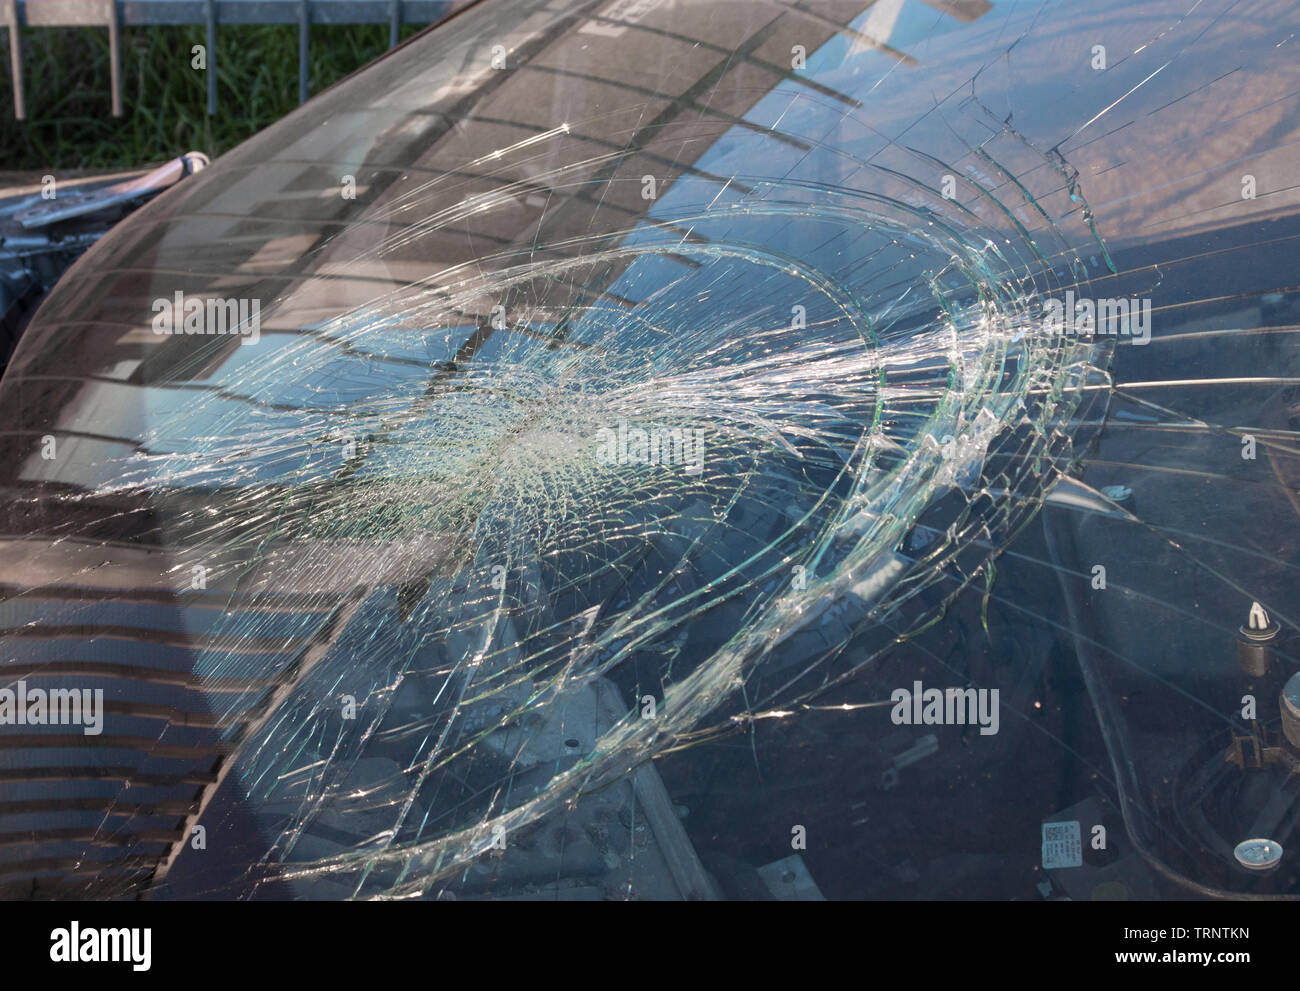 damaged car, with broken windshield Stock Photo